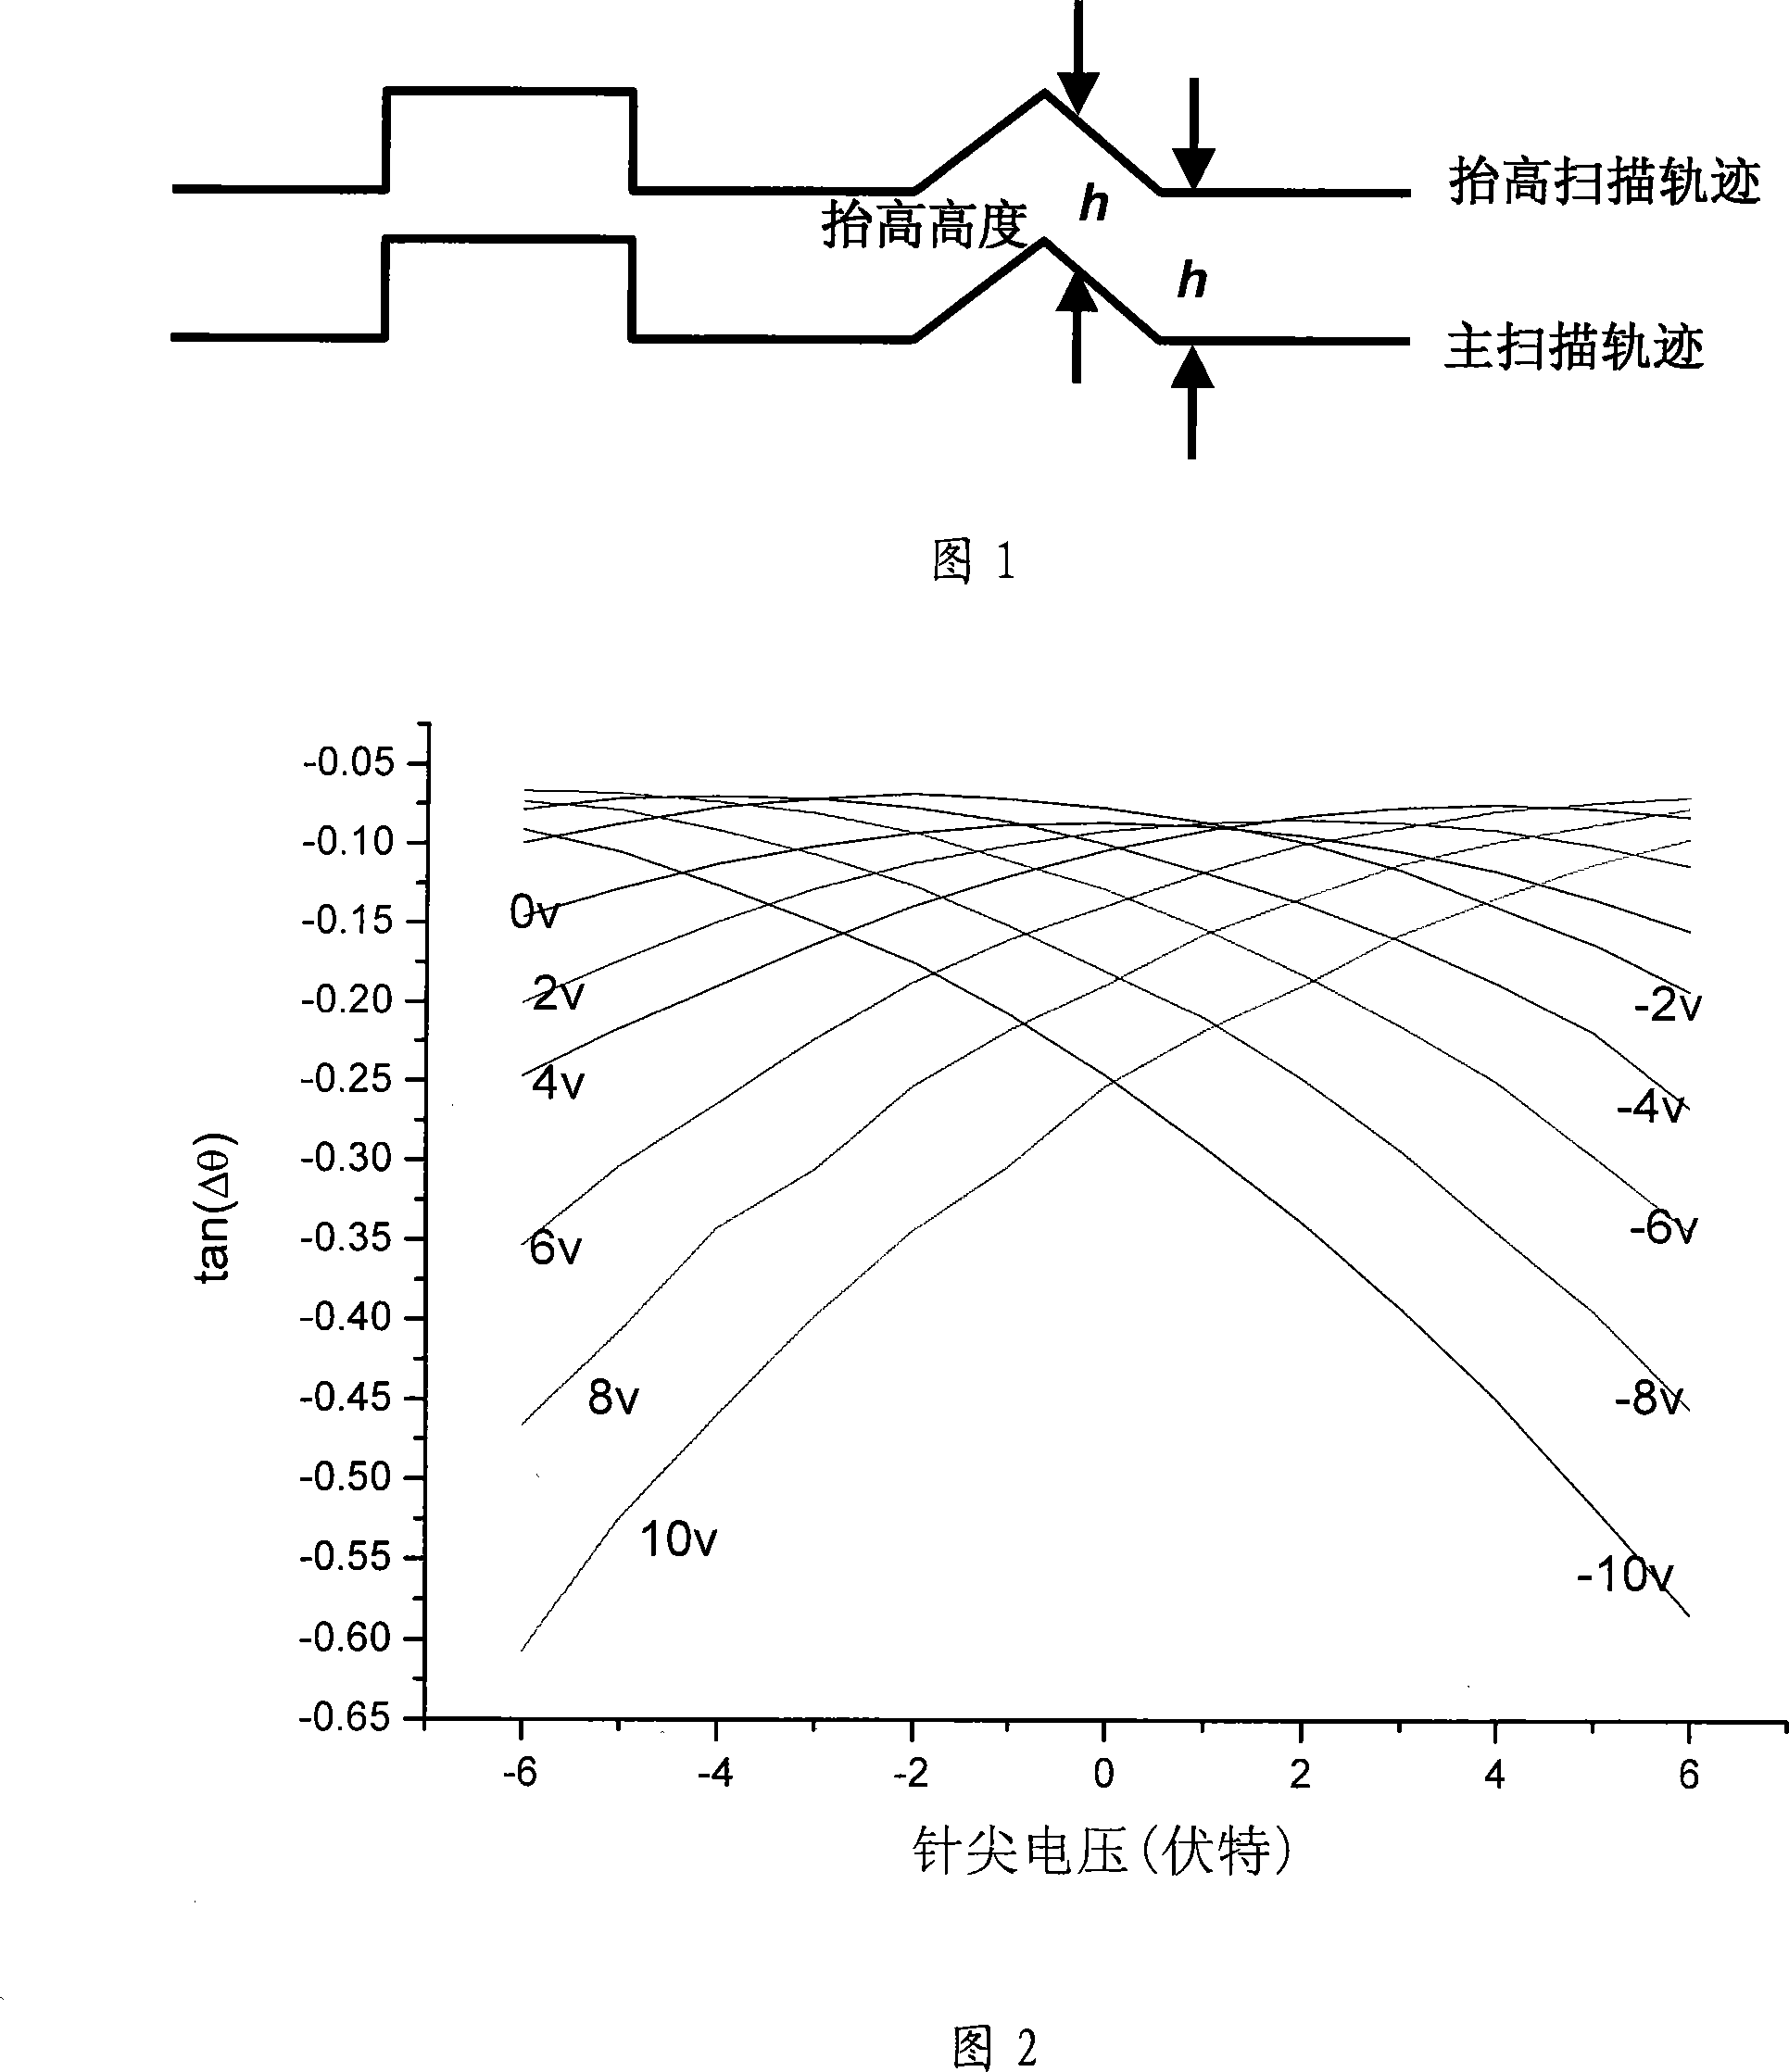 Method for measuring surface charge density of materials